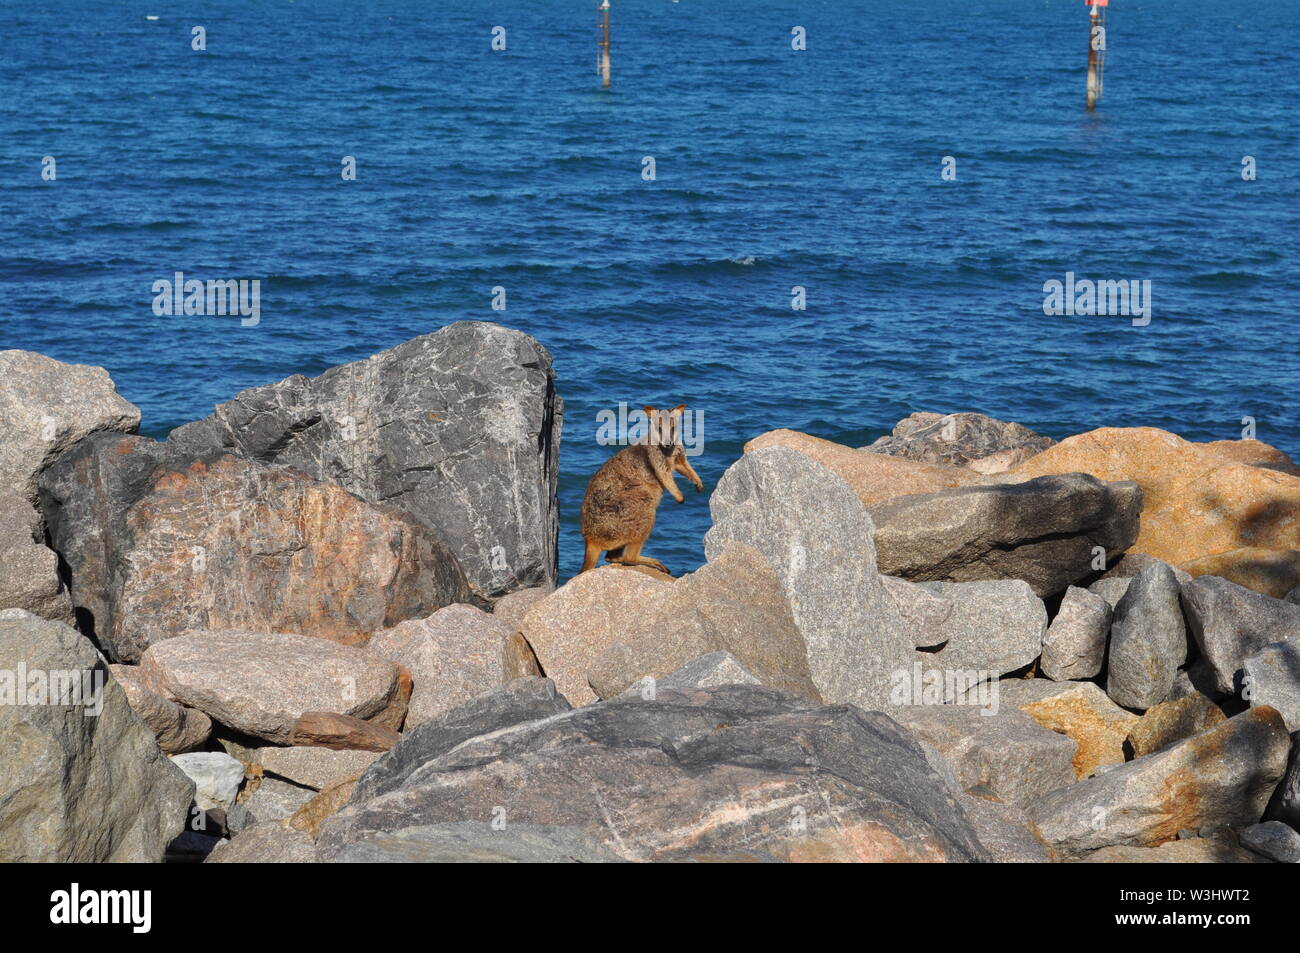 Allied rock wallaby, Petrogale Assimilis on the rocks at Nelly Bay, Magnetic Island, Australia Stock Photo